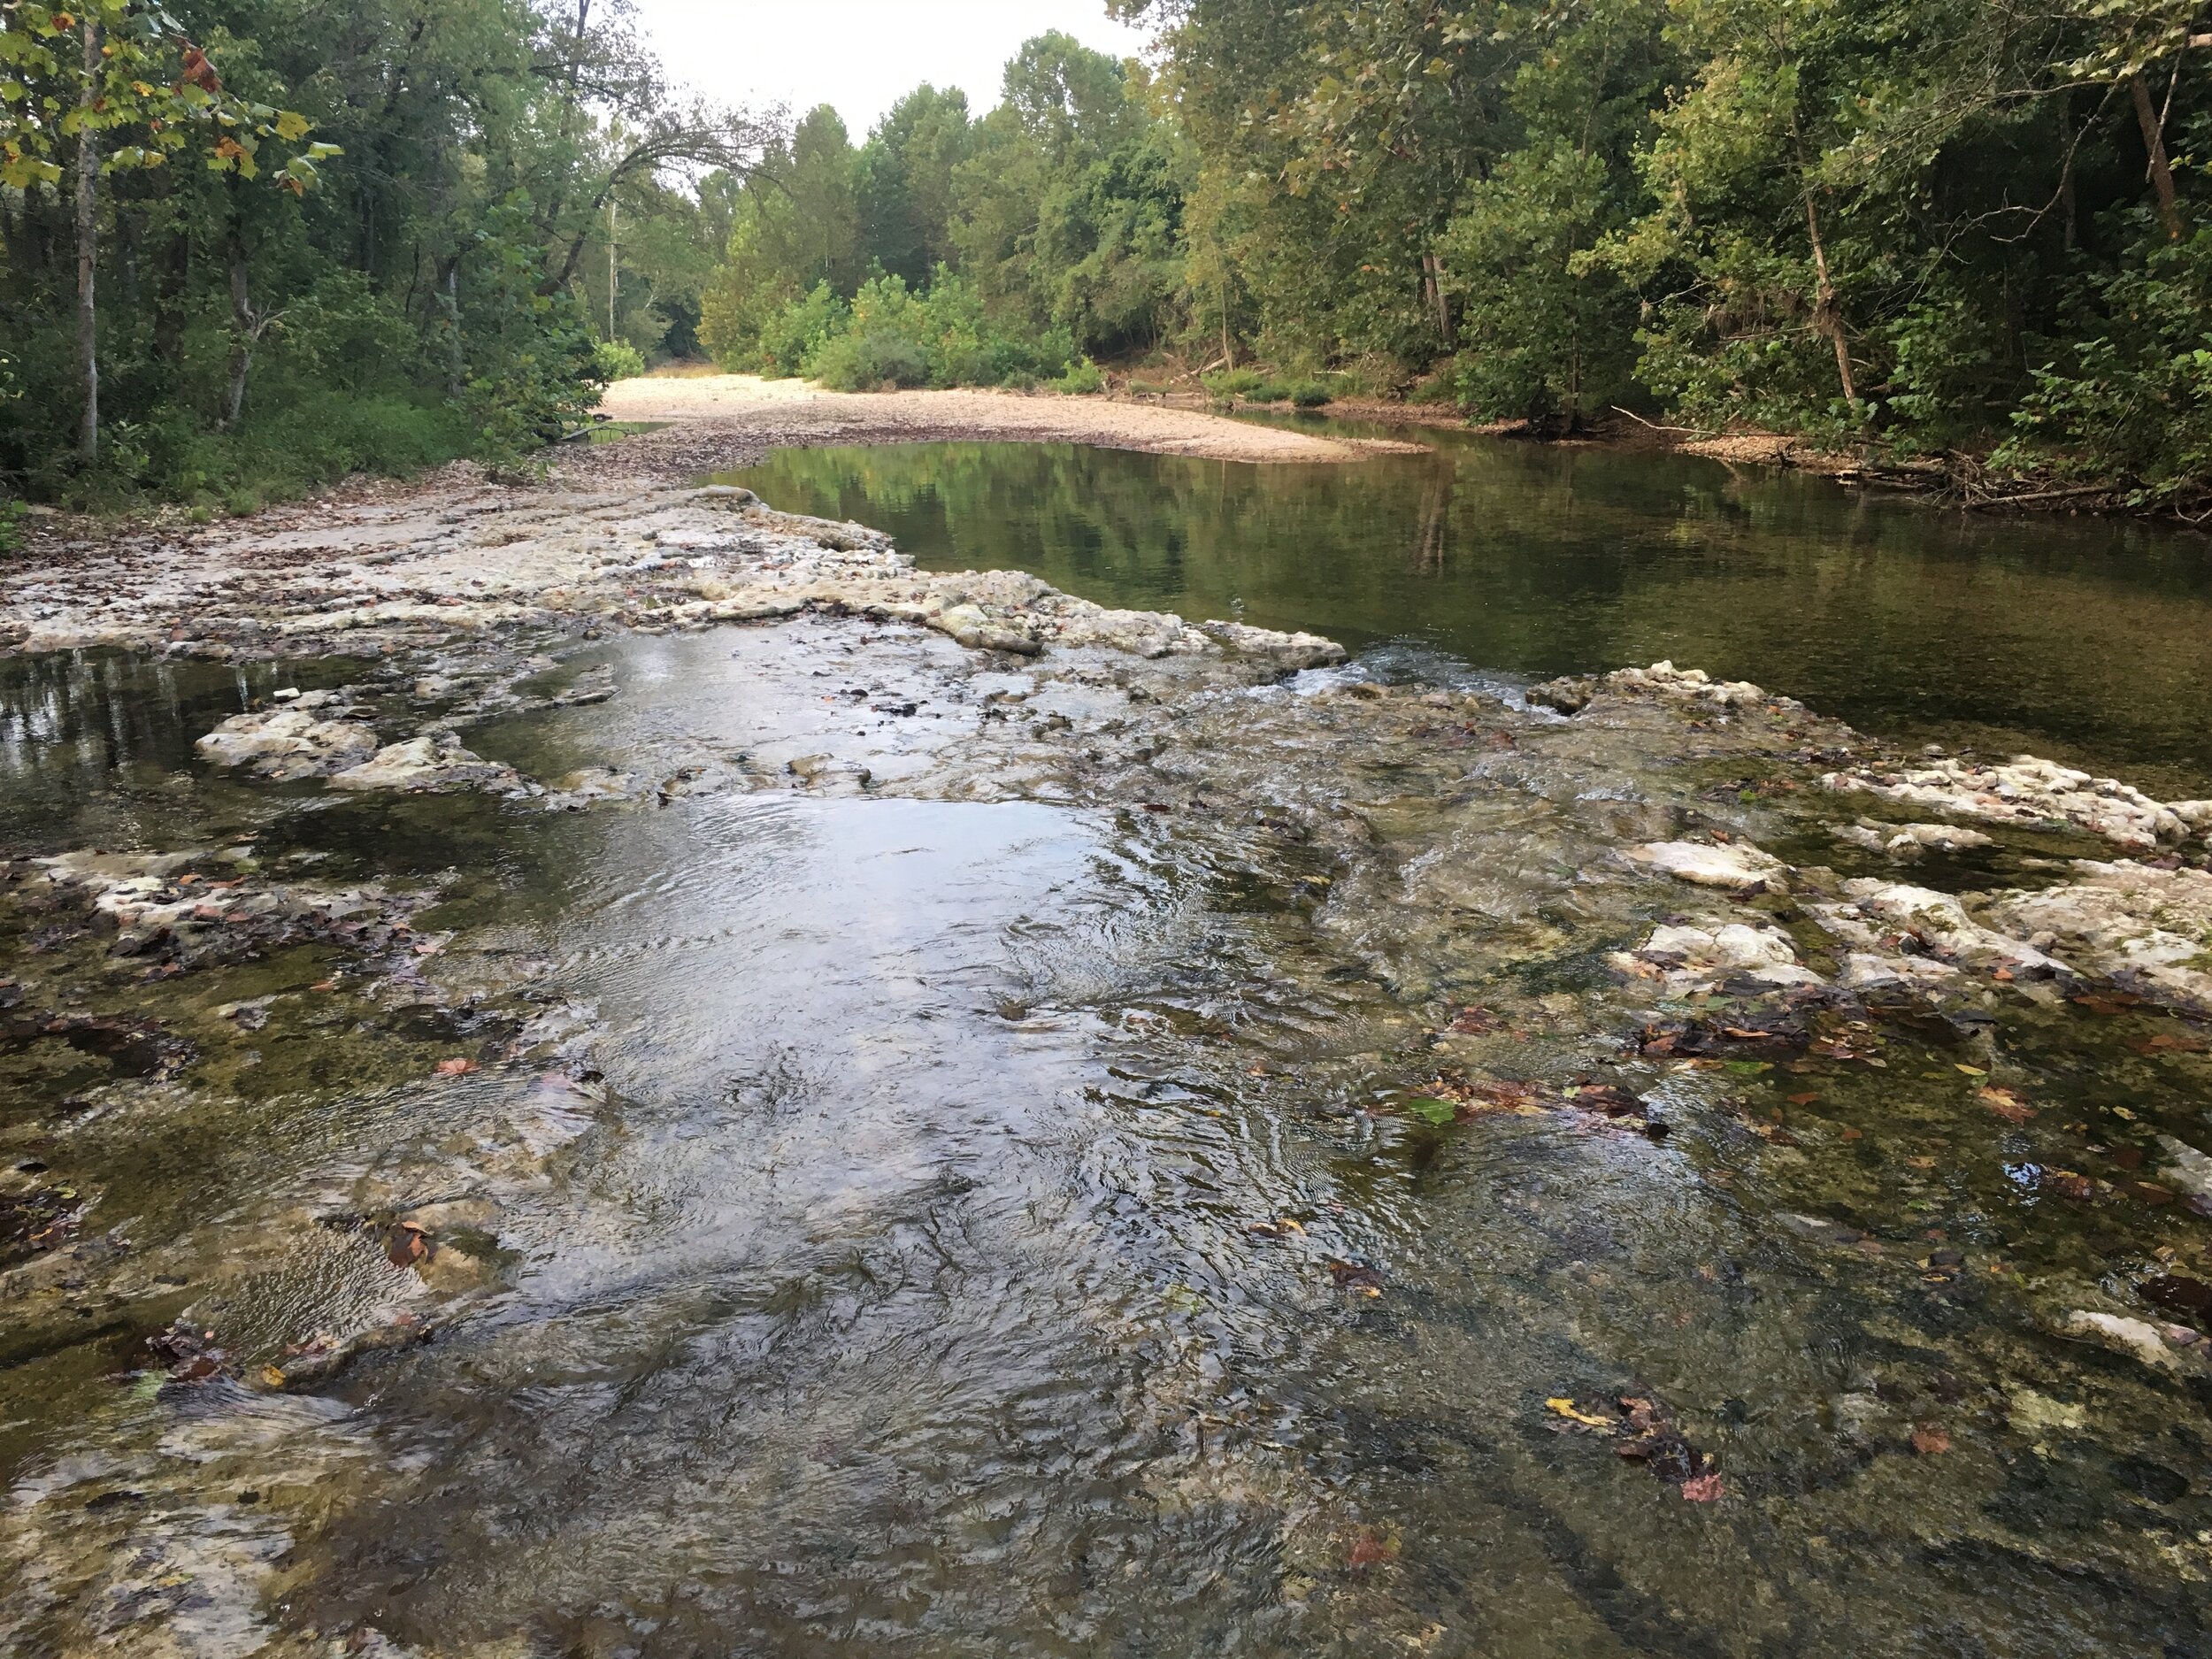 Bull Creek as it flows through Bull Mills, a favorite field site of the lab